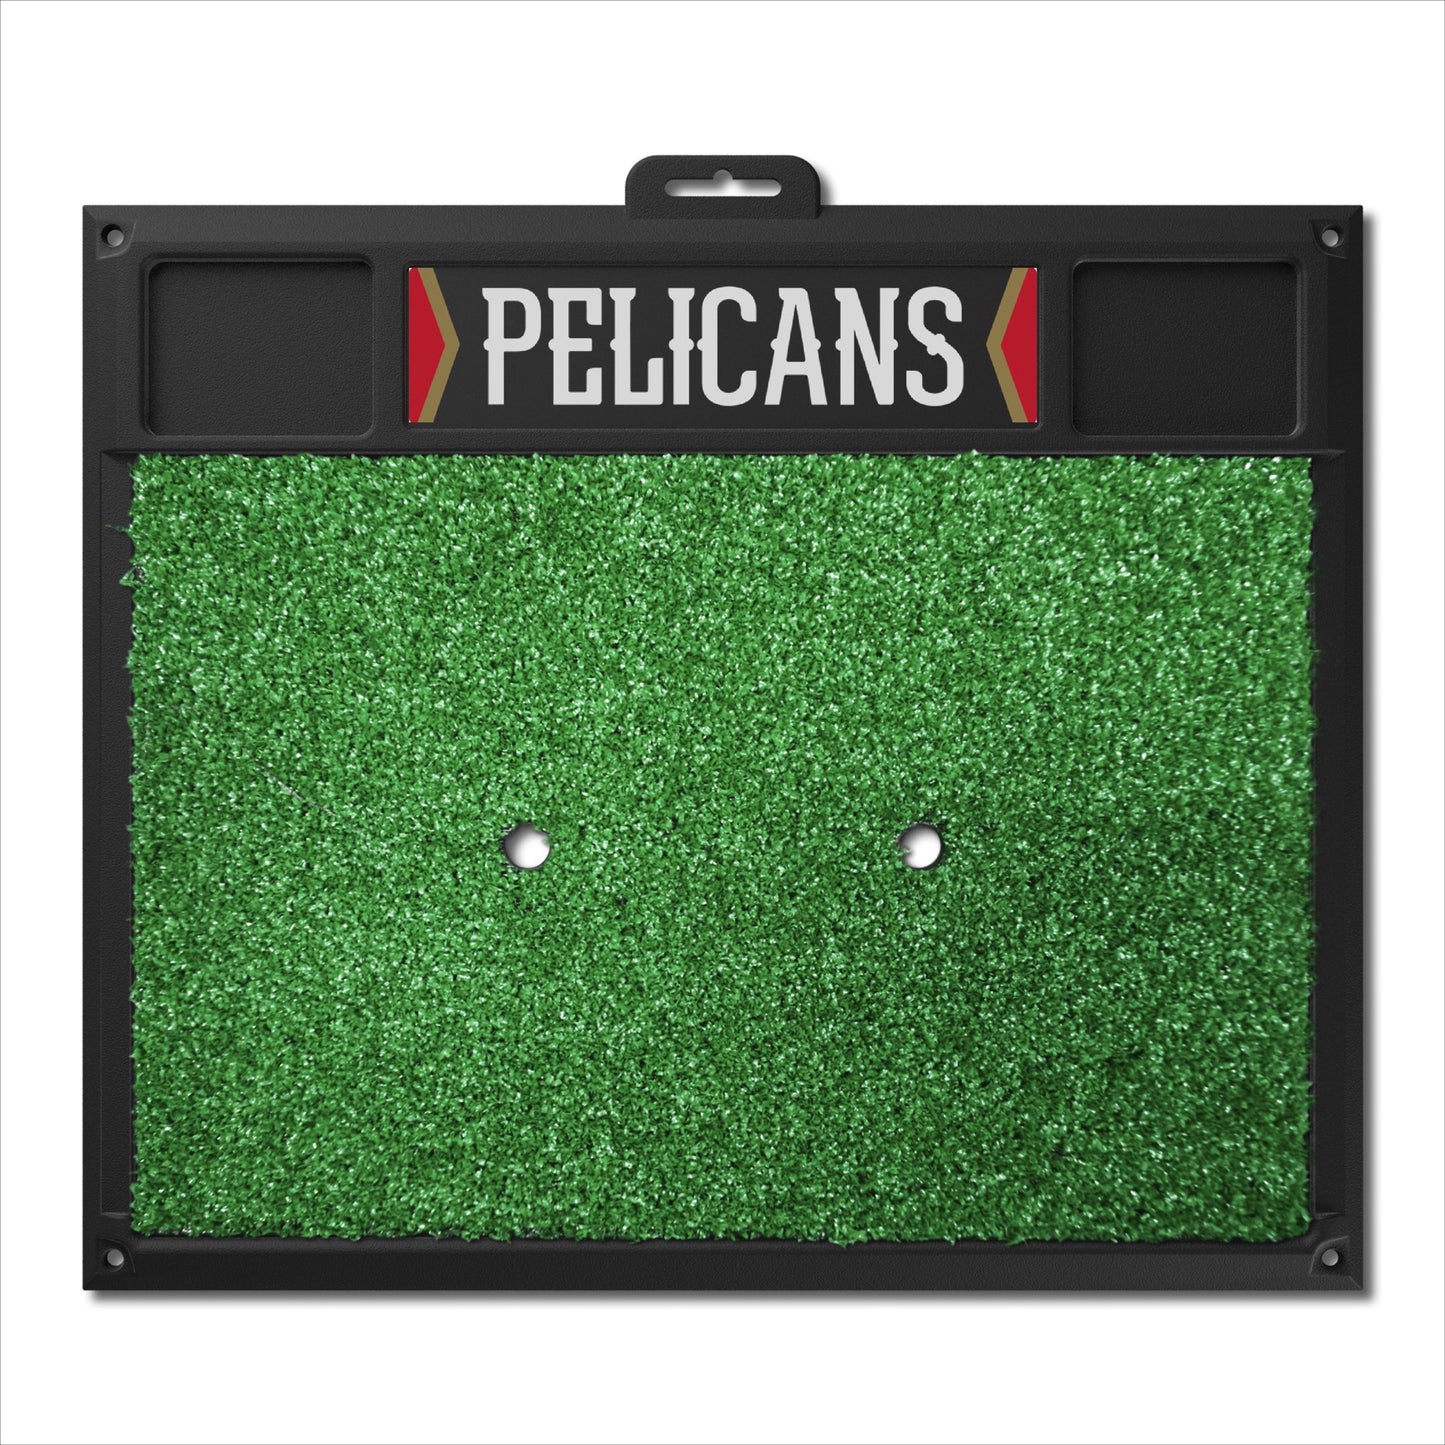 New Orleans Pelicans Golf Hitting Mat by Fanmats